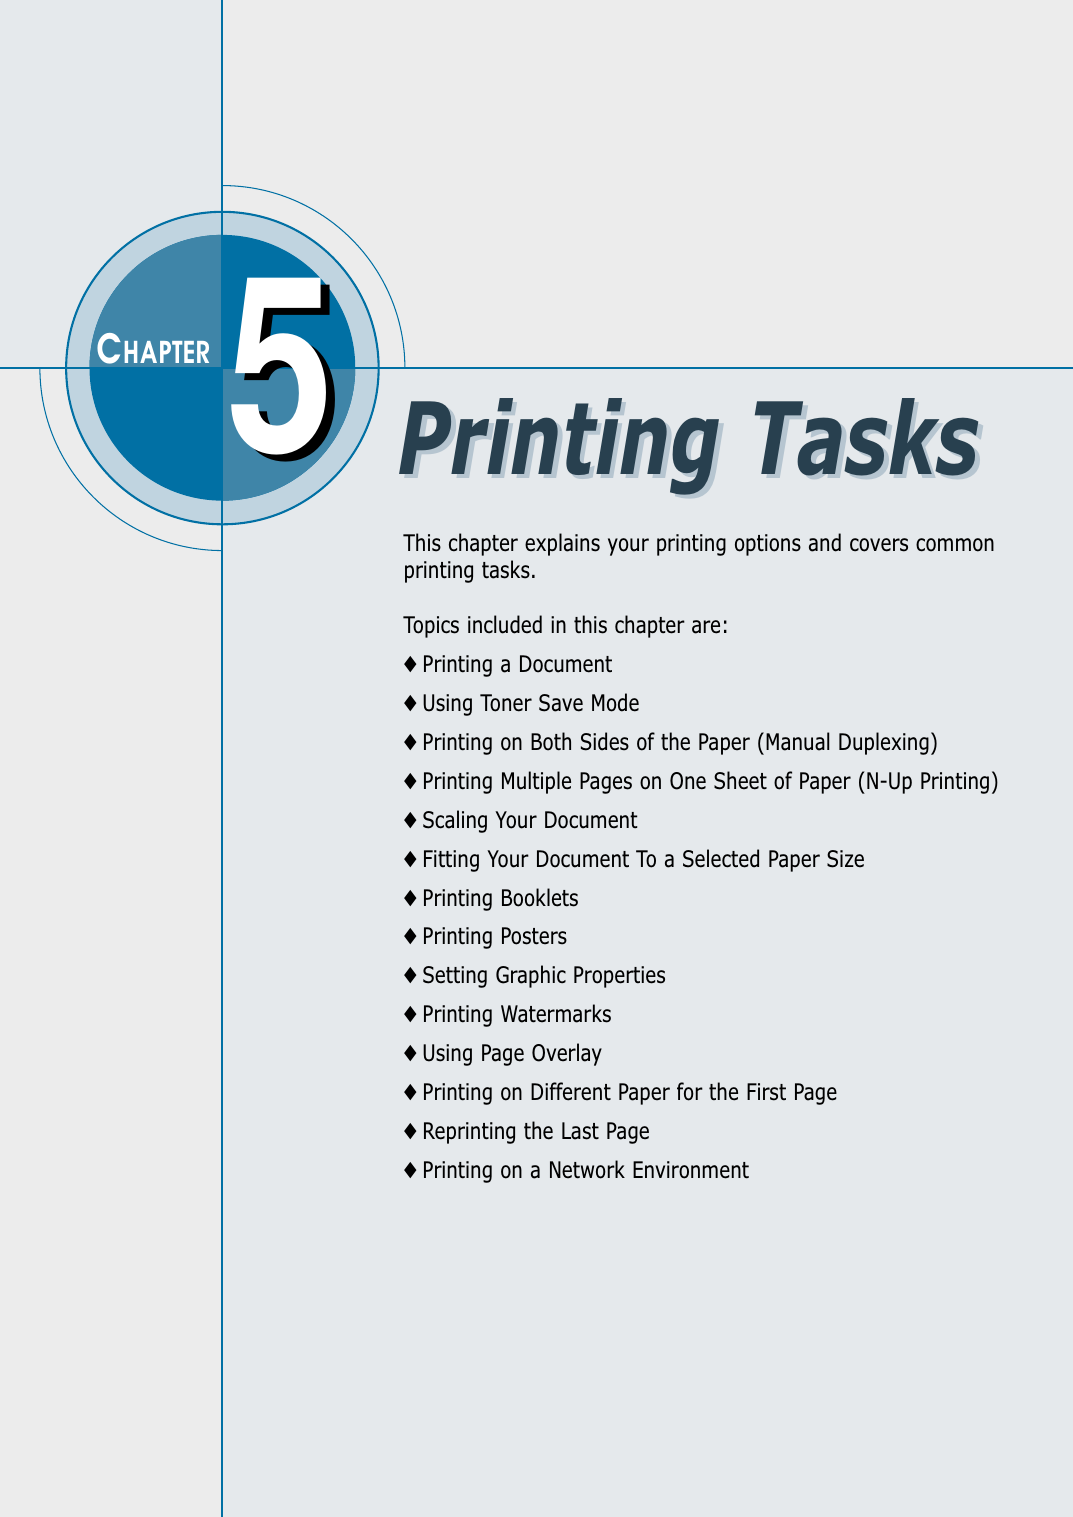 This chapter explains your printing options and covers commonprinting tasks.Topics included in this chapter are:◆ Printing a Document◆ Using Toner Save Mode◆ Printing on Both Sides of the Paper (Manual Duplexing)◆ Printing Multiple Pages on One Sheet of Paper (N-Up Printing)◆ Scaling Your Document ◆ Fitting Your Document To a Selected Paper Size ◆ Printing Booklets◆ Printing Posters◆ Setting Graphic Properties◆ Printing Watermarks◆ Using Page Overlay◆ Printing on Different Paper for the First Page◆ Reprinting the Last Page◆ Printing on a Network EnvironmentPrinting TasksPrinting Tasks55CHAPTER